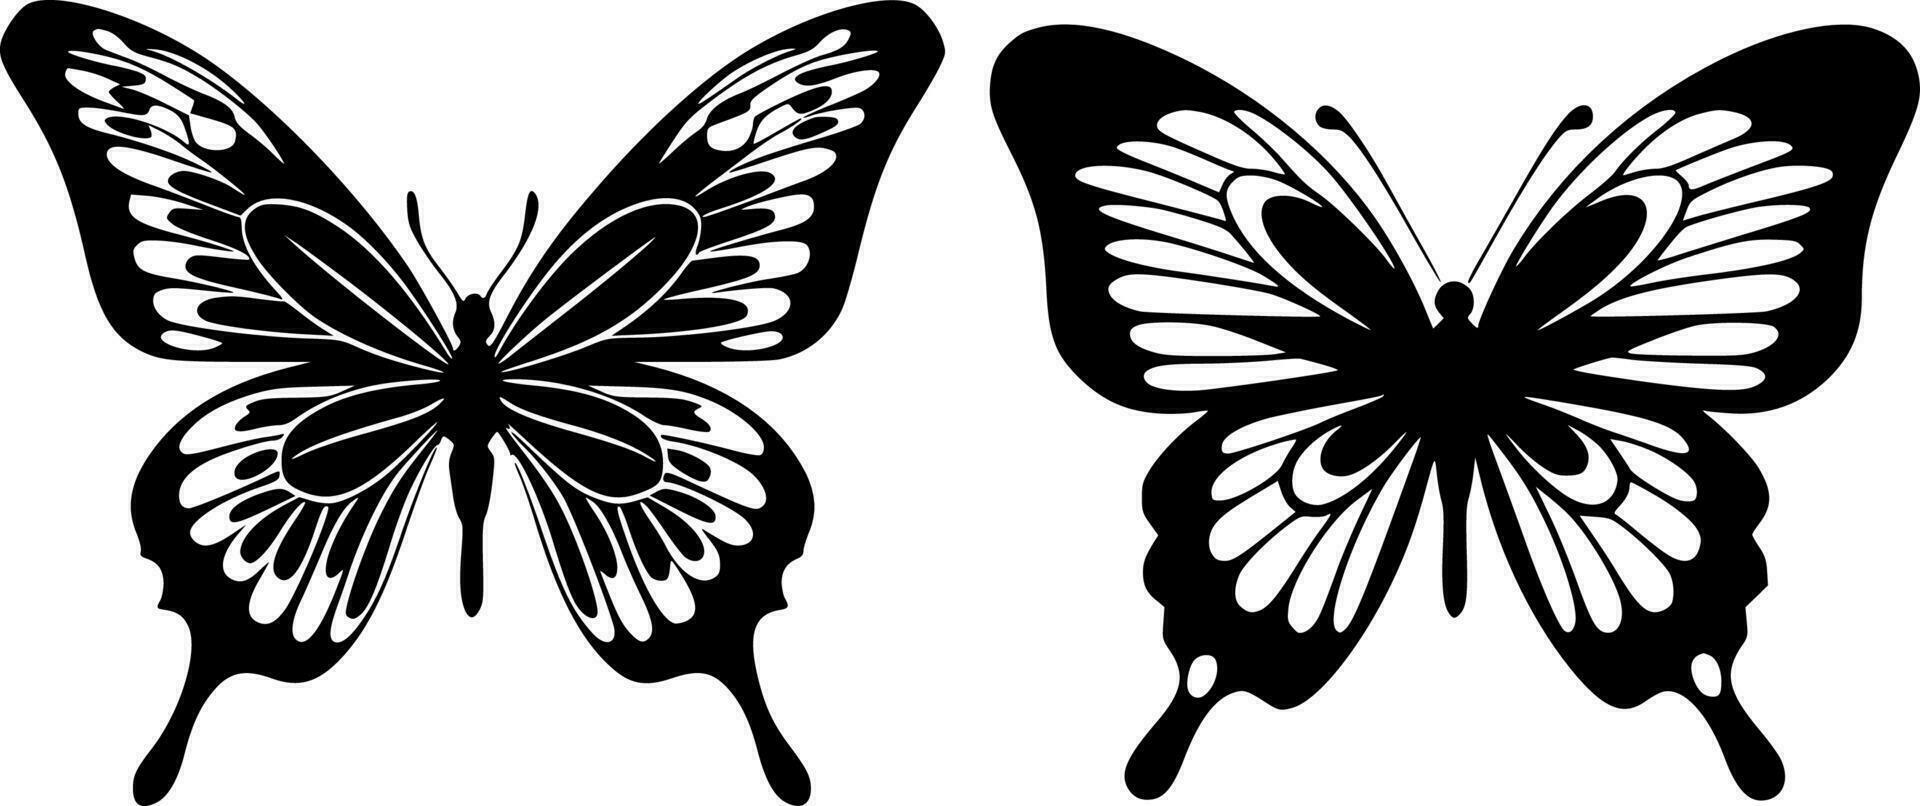 Butterflies - Black and White Isolated Icon - Vector illustration